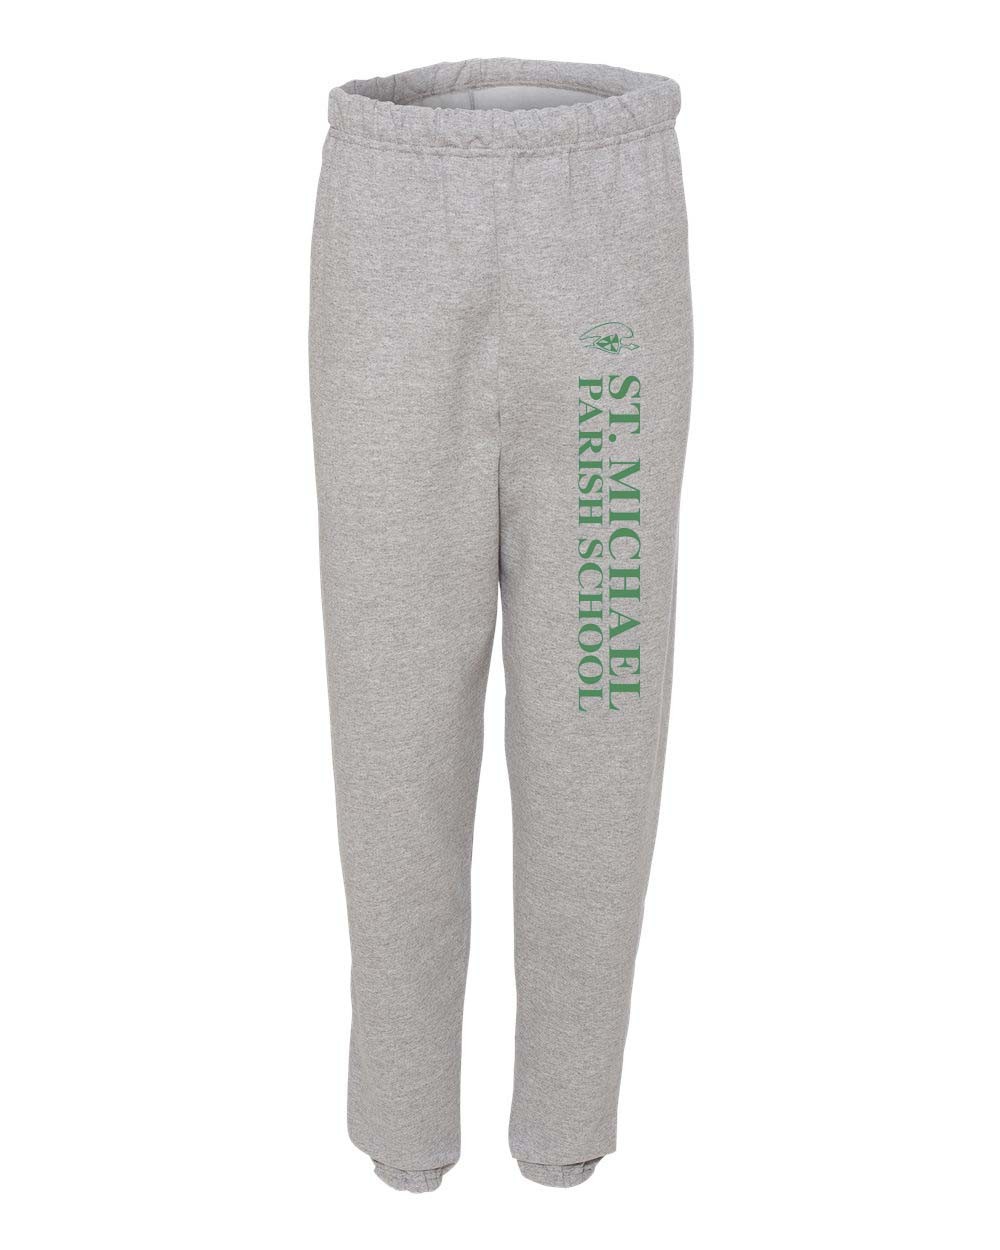 SMSU Spirit Sweatpants w/ Green Logo  #22- Please Allow 2-3 Weeks for Delivery